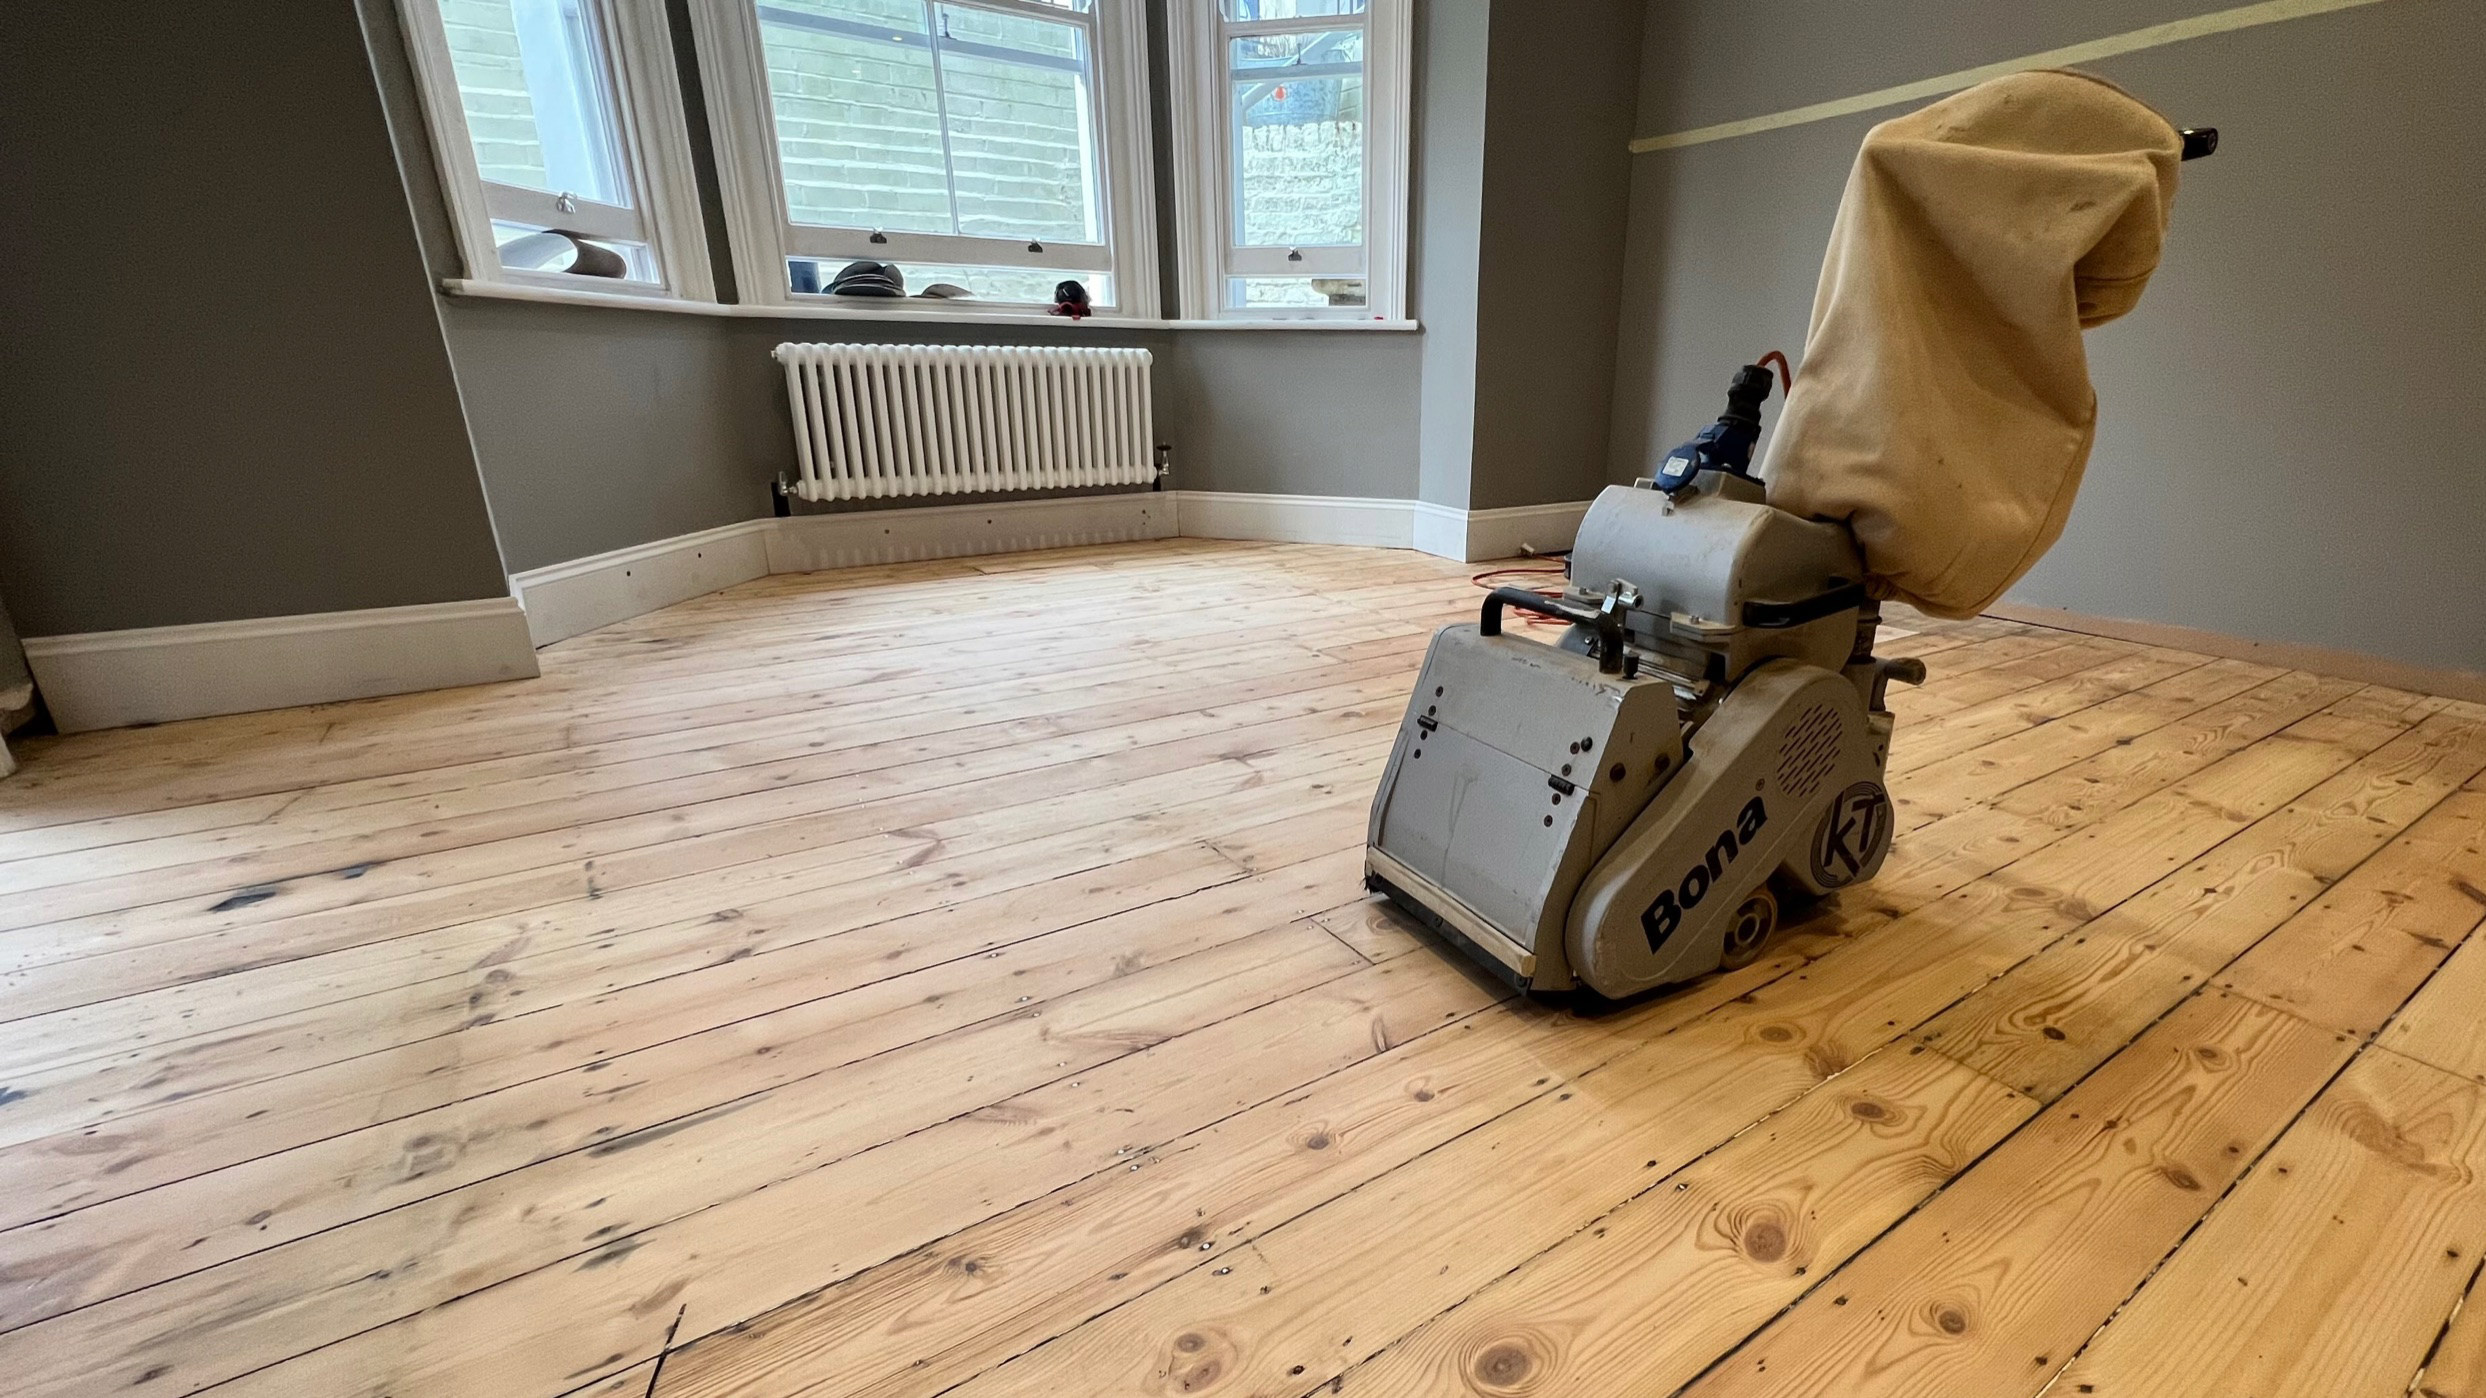 Mark Antony & Sons are Kent's leading floor sanding experts. Image shows a wooden floor in a Tunbridge Wells home with a professional dust-free Bona sander.